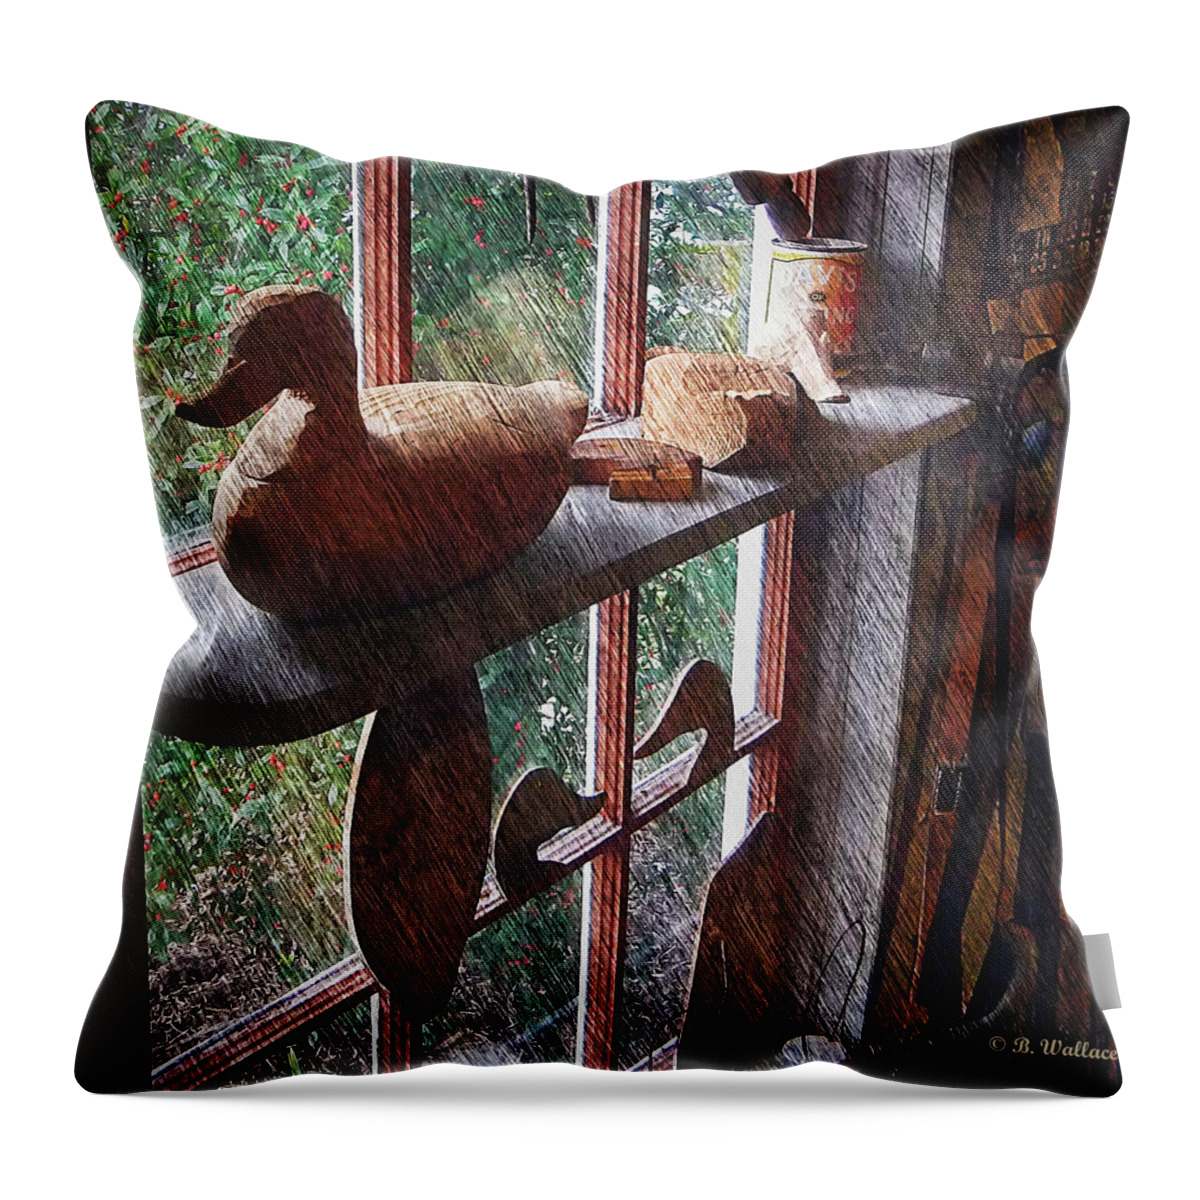 2d Throw Pillow featuring the photograph Workshop Window by Brian Wallace